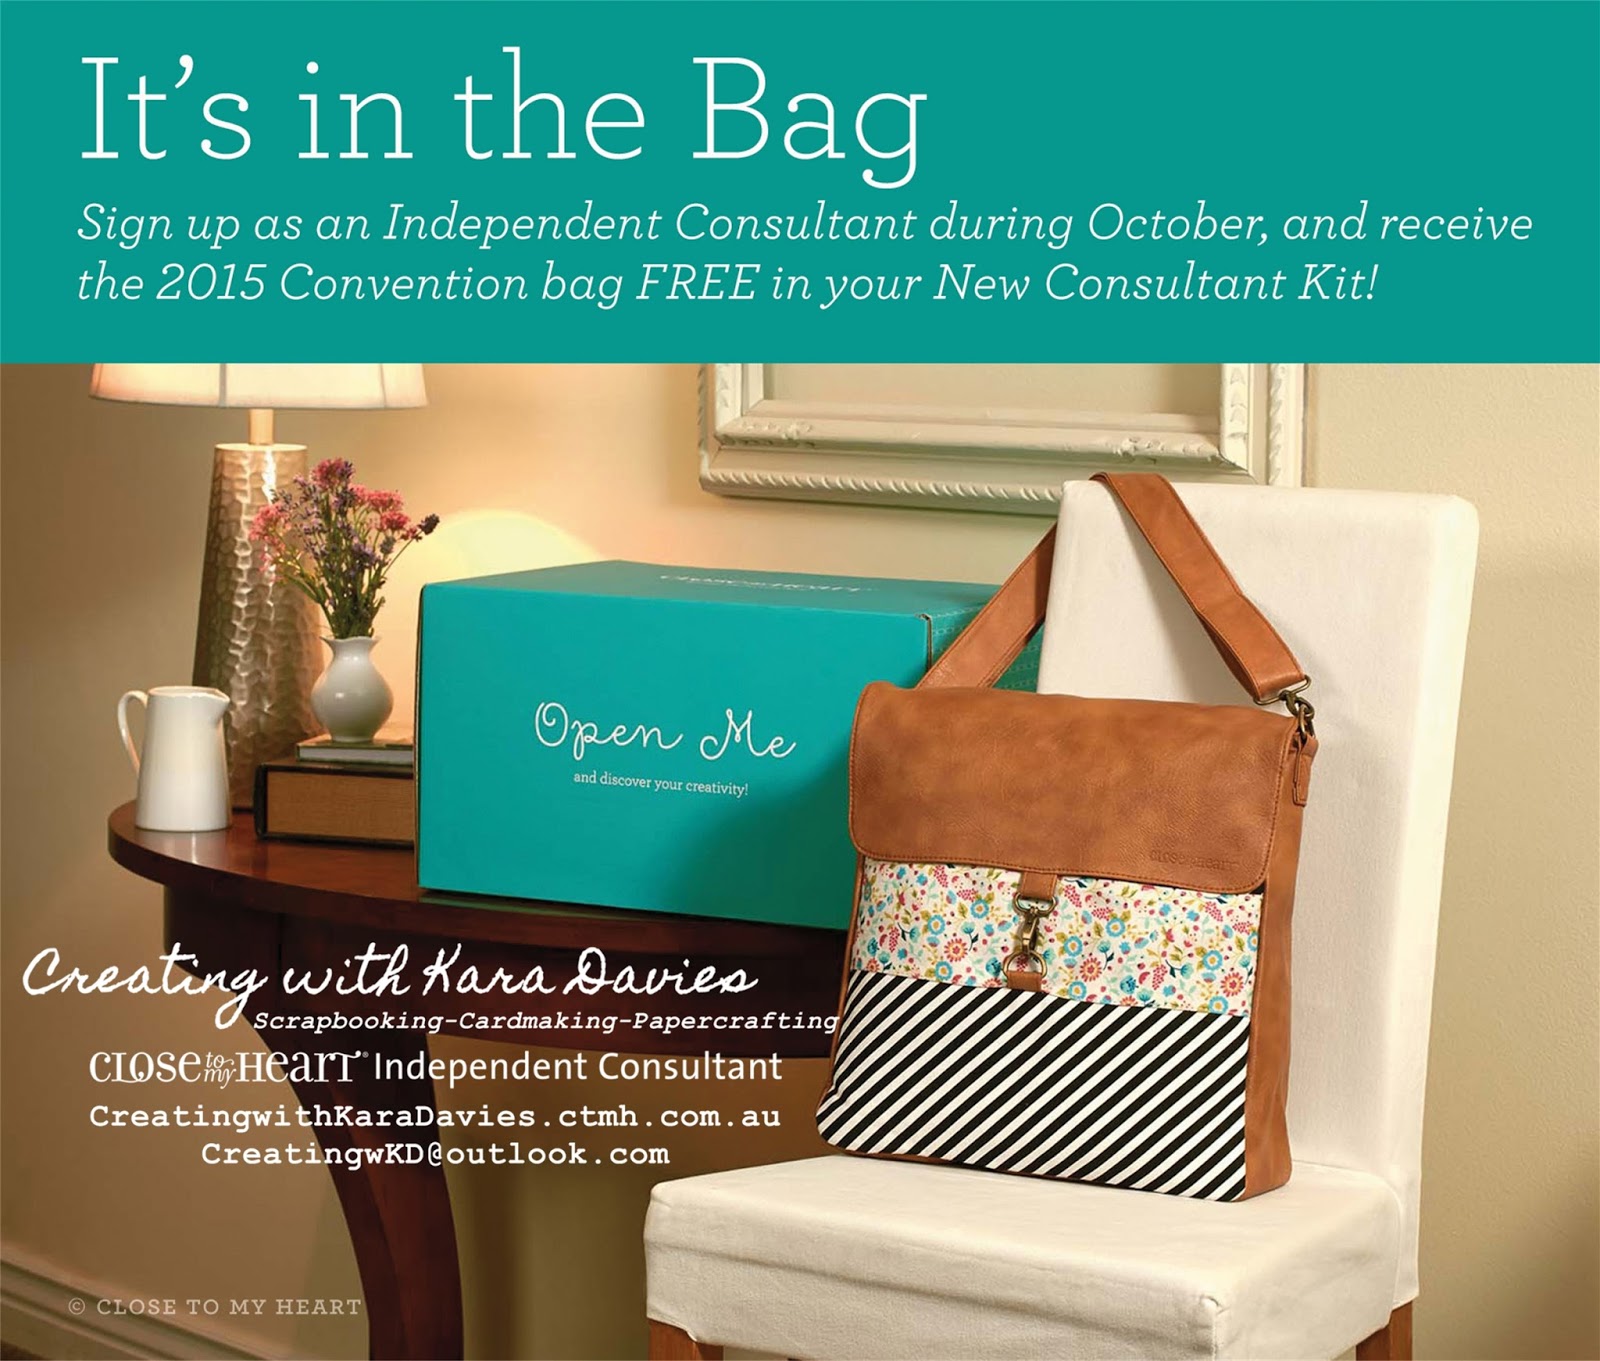 Creating with Kara Davies: October, it's in the bag!